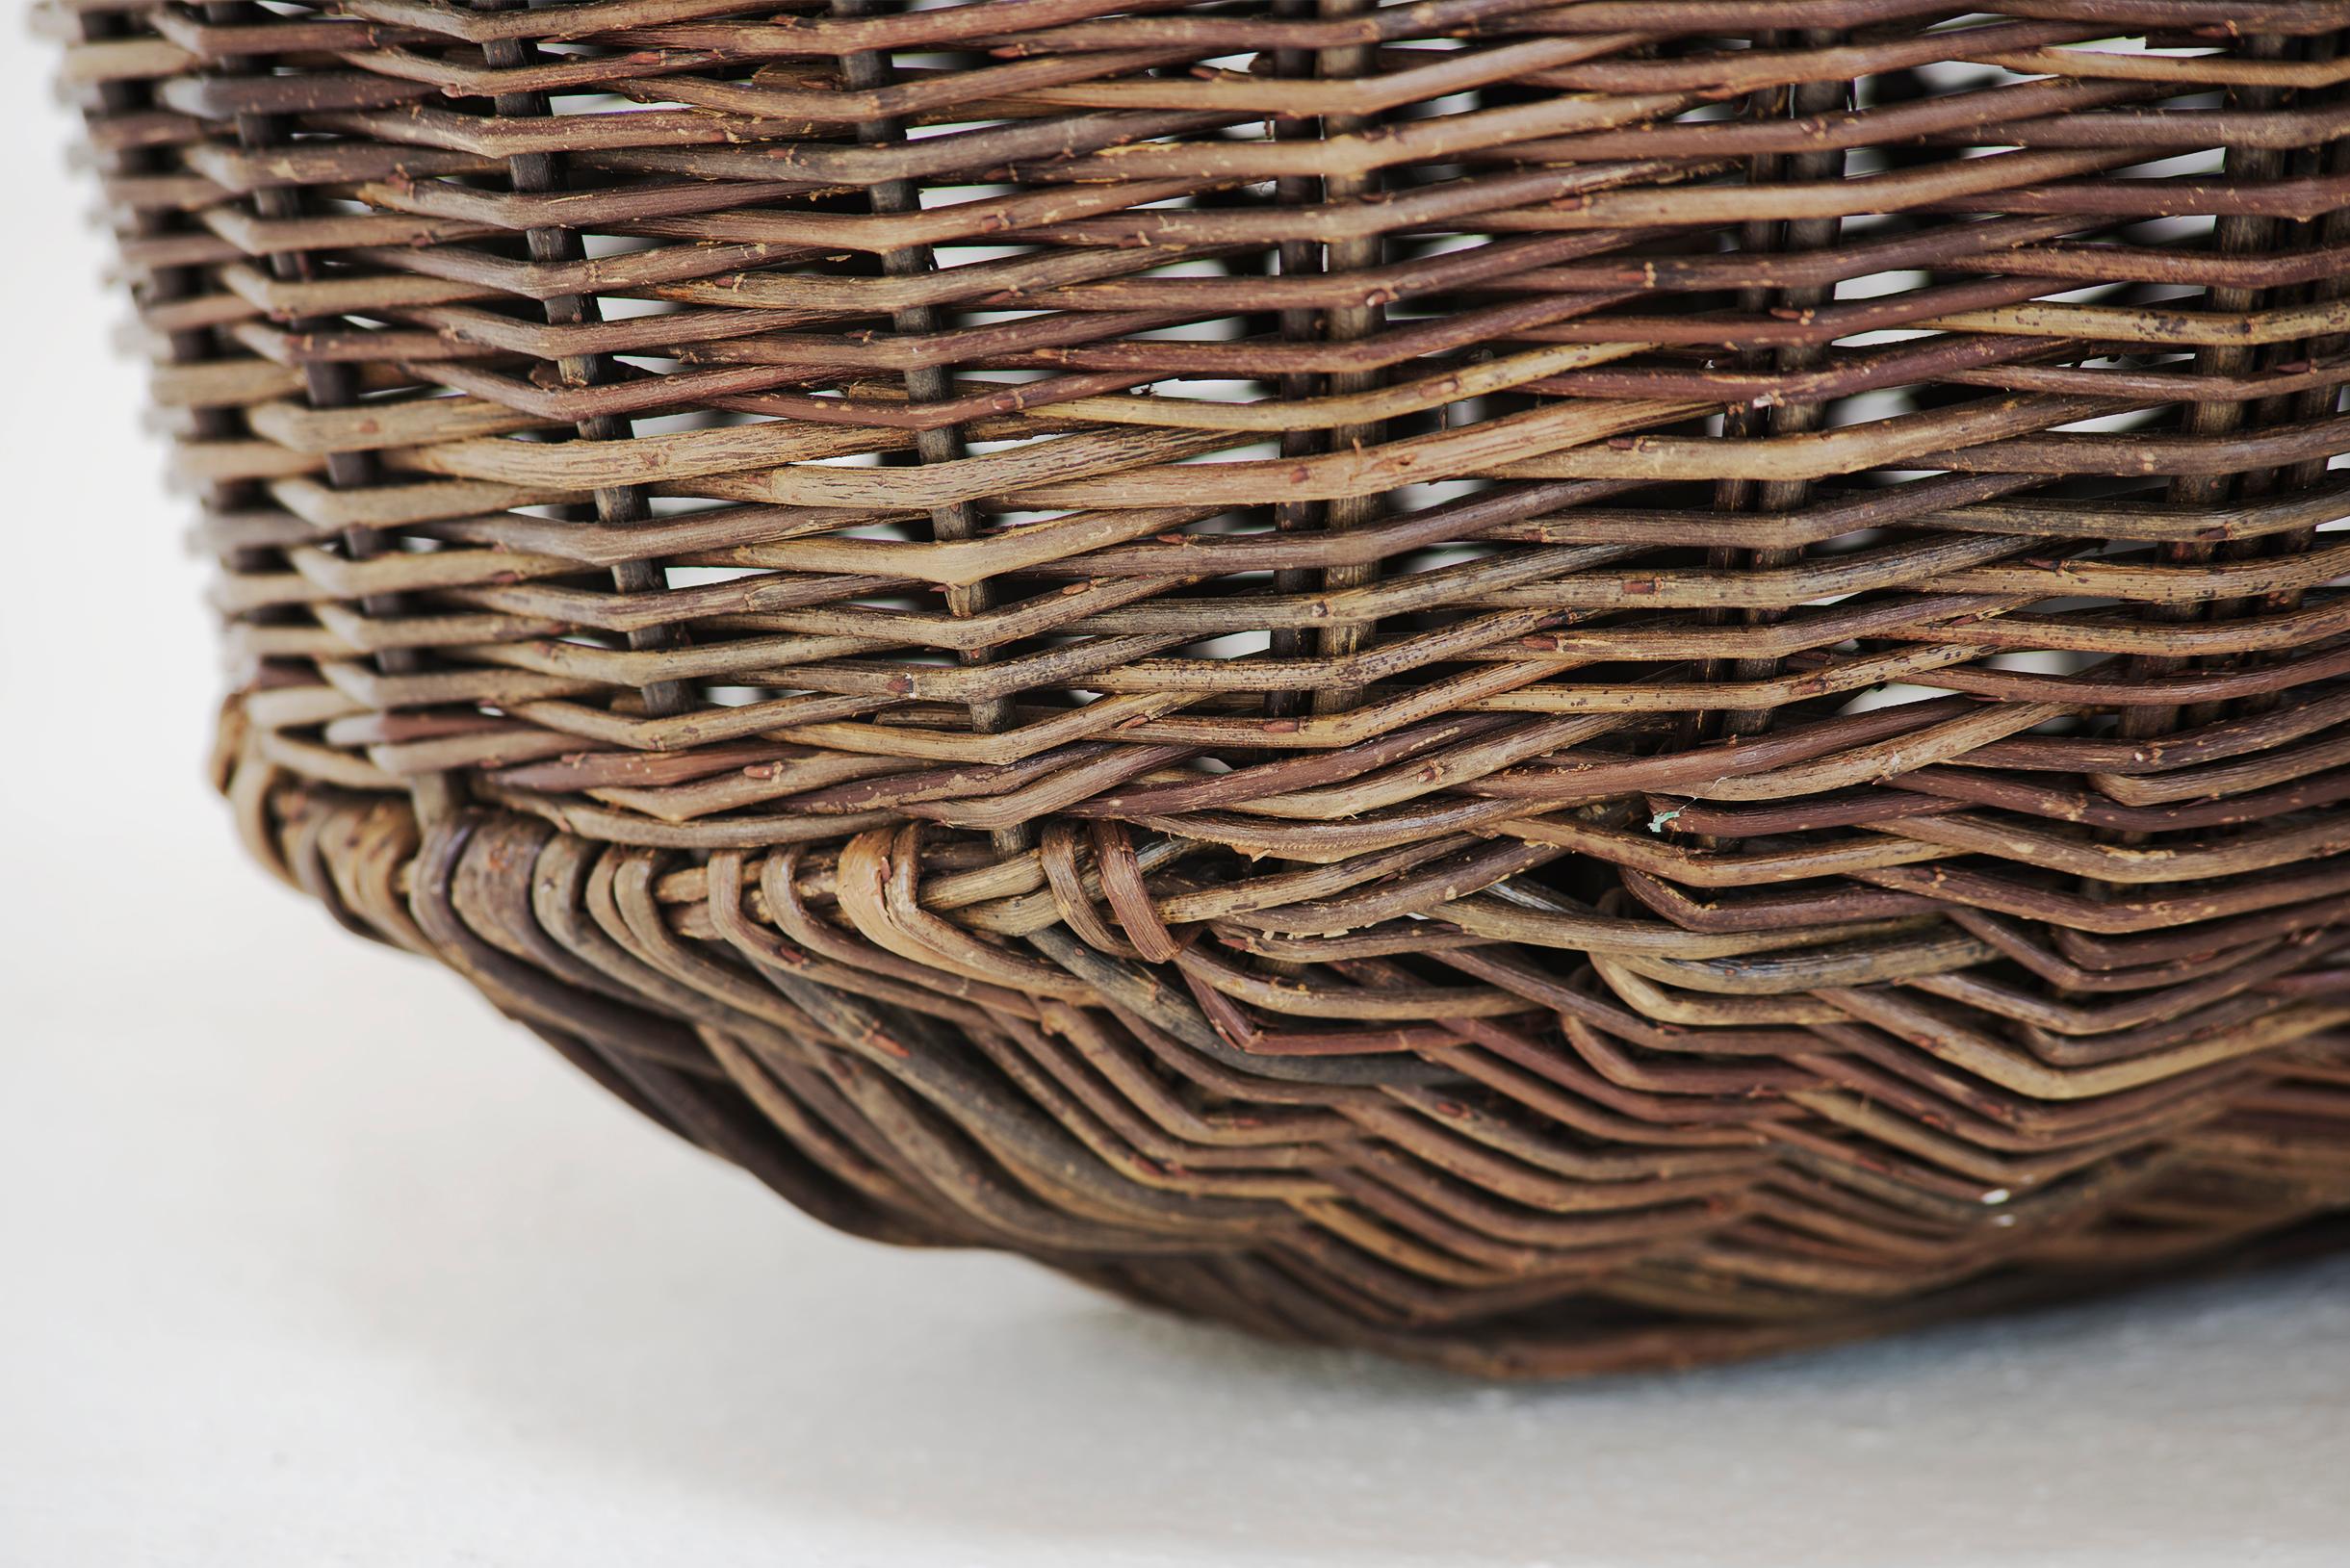 Willow Crafted basket by Joe Hogan, Irland, 2009